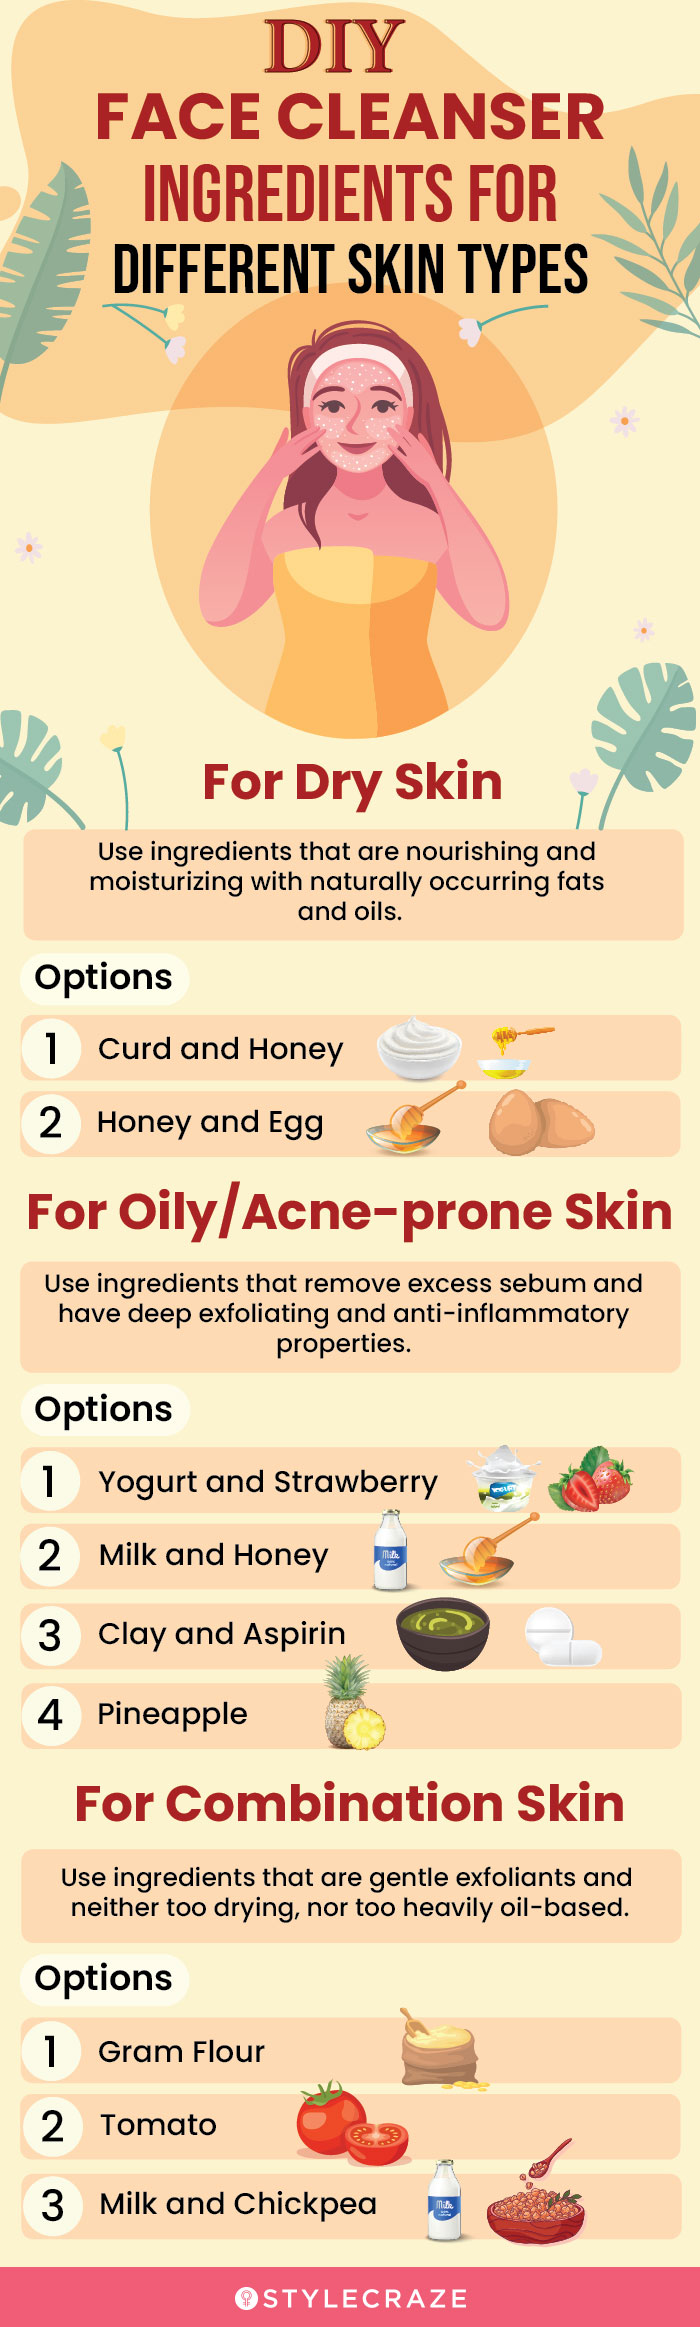 diy face cleanser ingredients for different skin types (infographic)